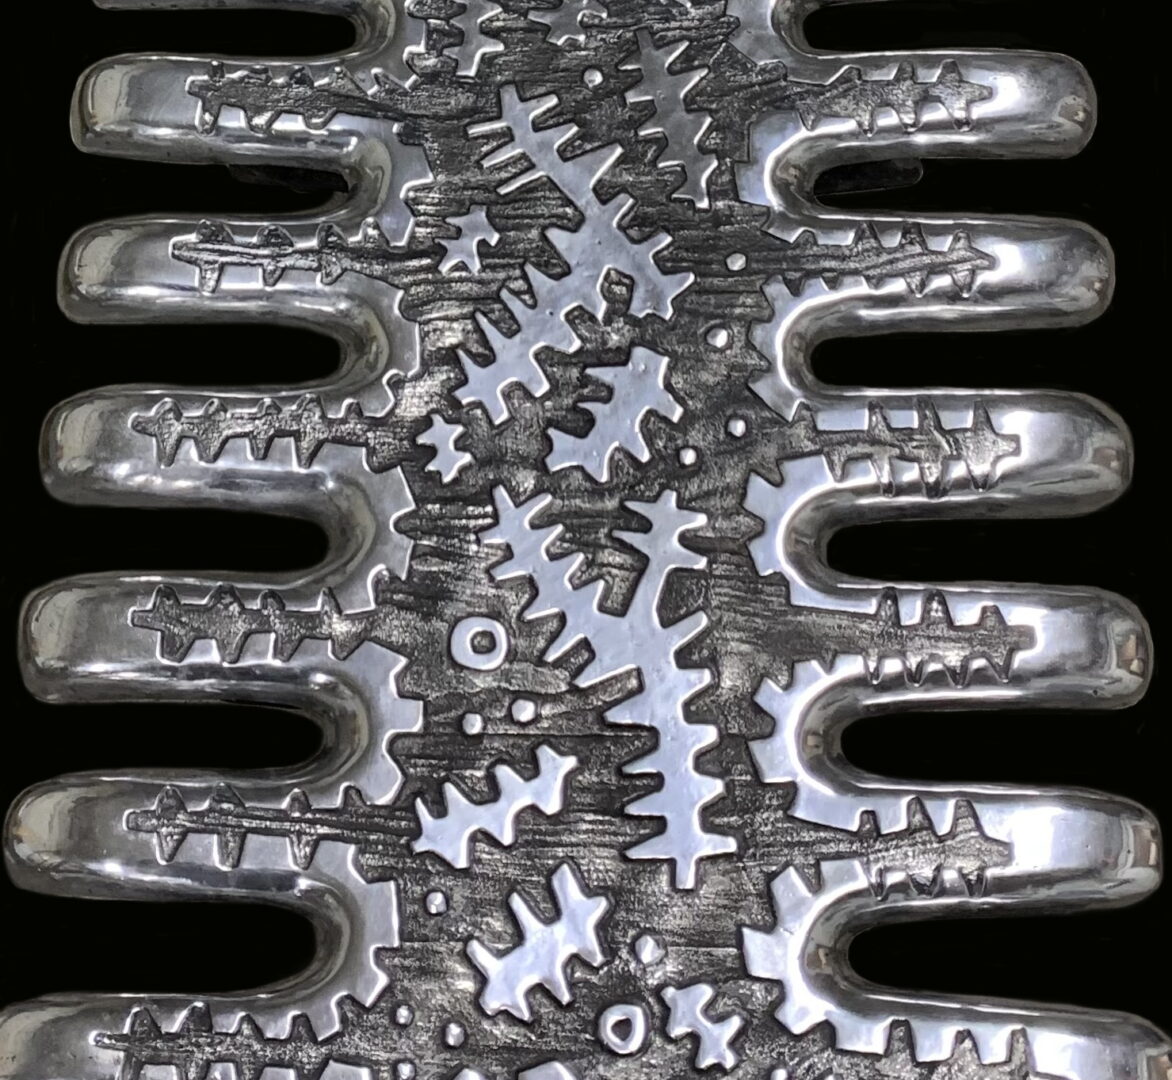 A close up of the metal gears on an engine